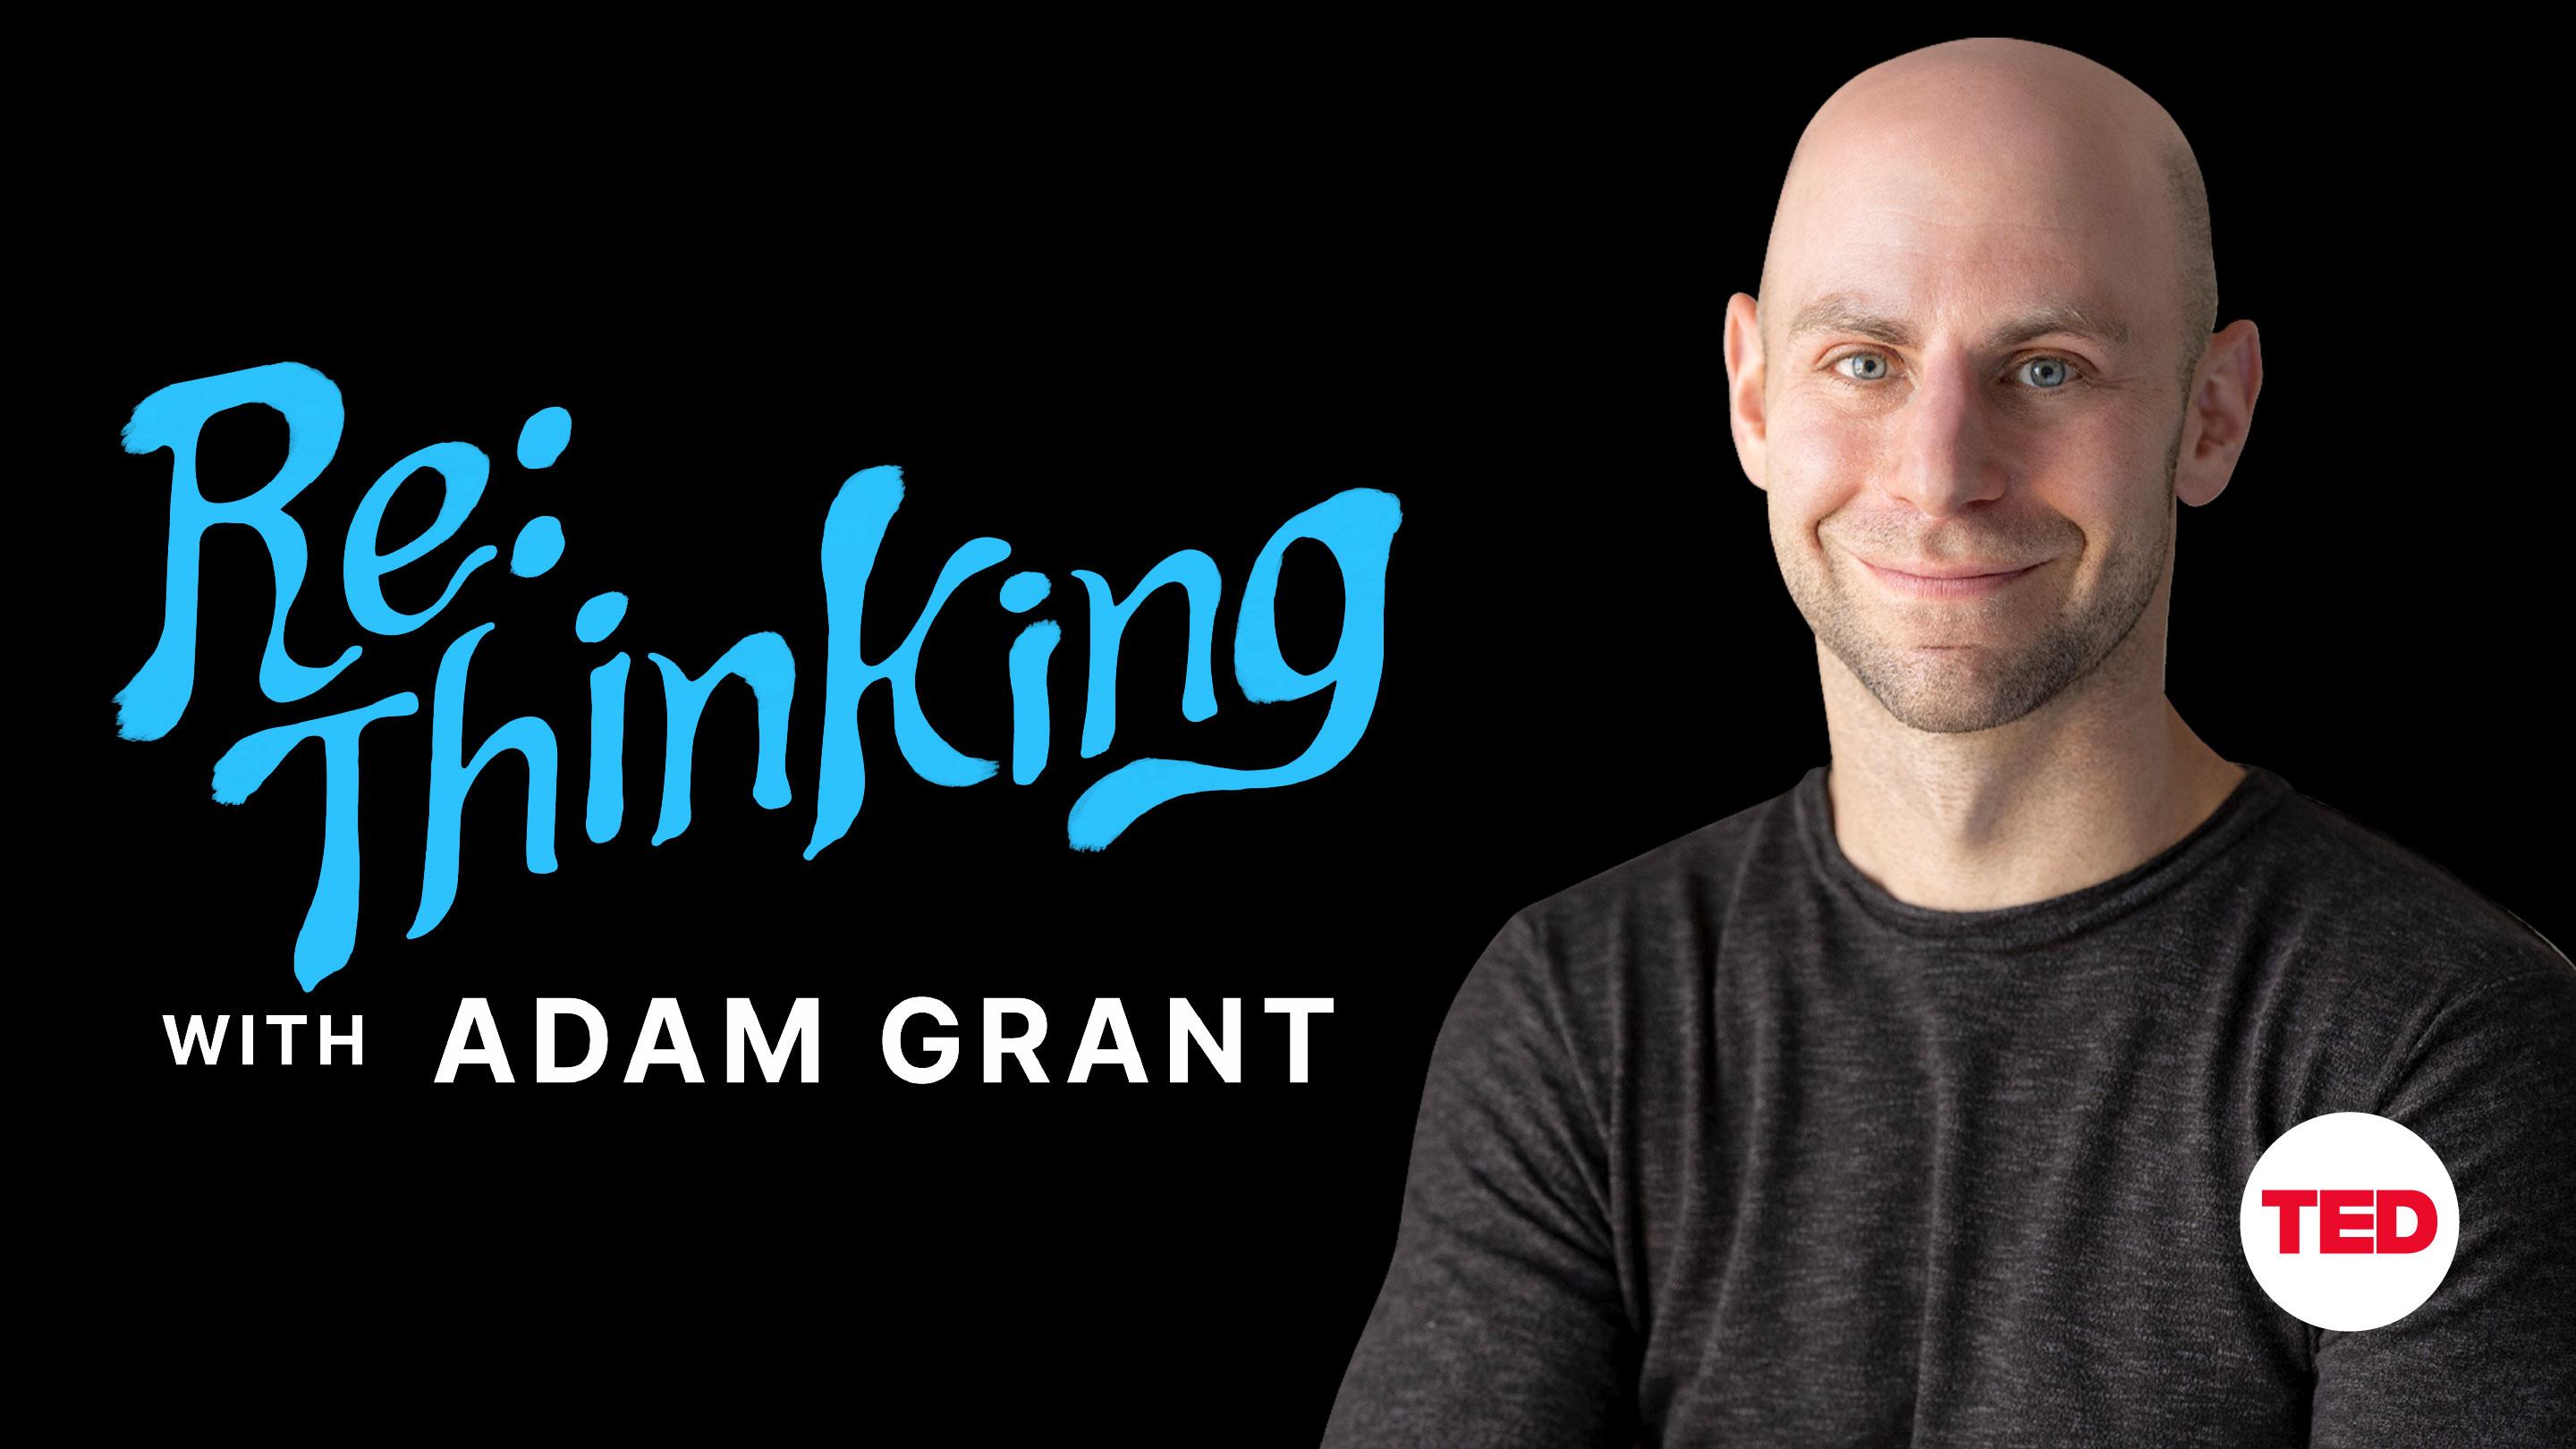 Mark Cuban doesn't believe in following your passions | ReThinking with Adam Grant